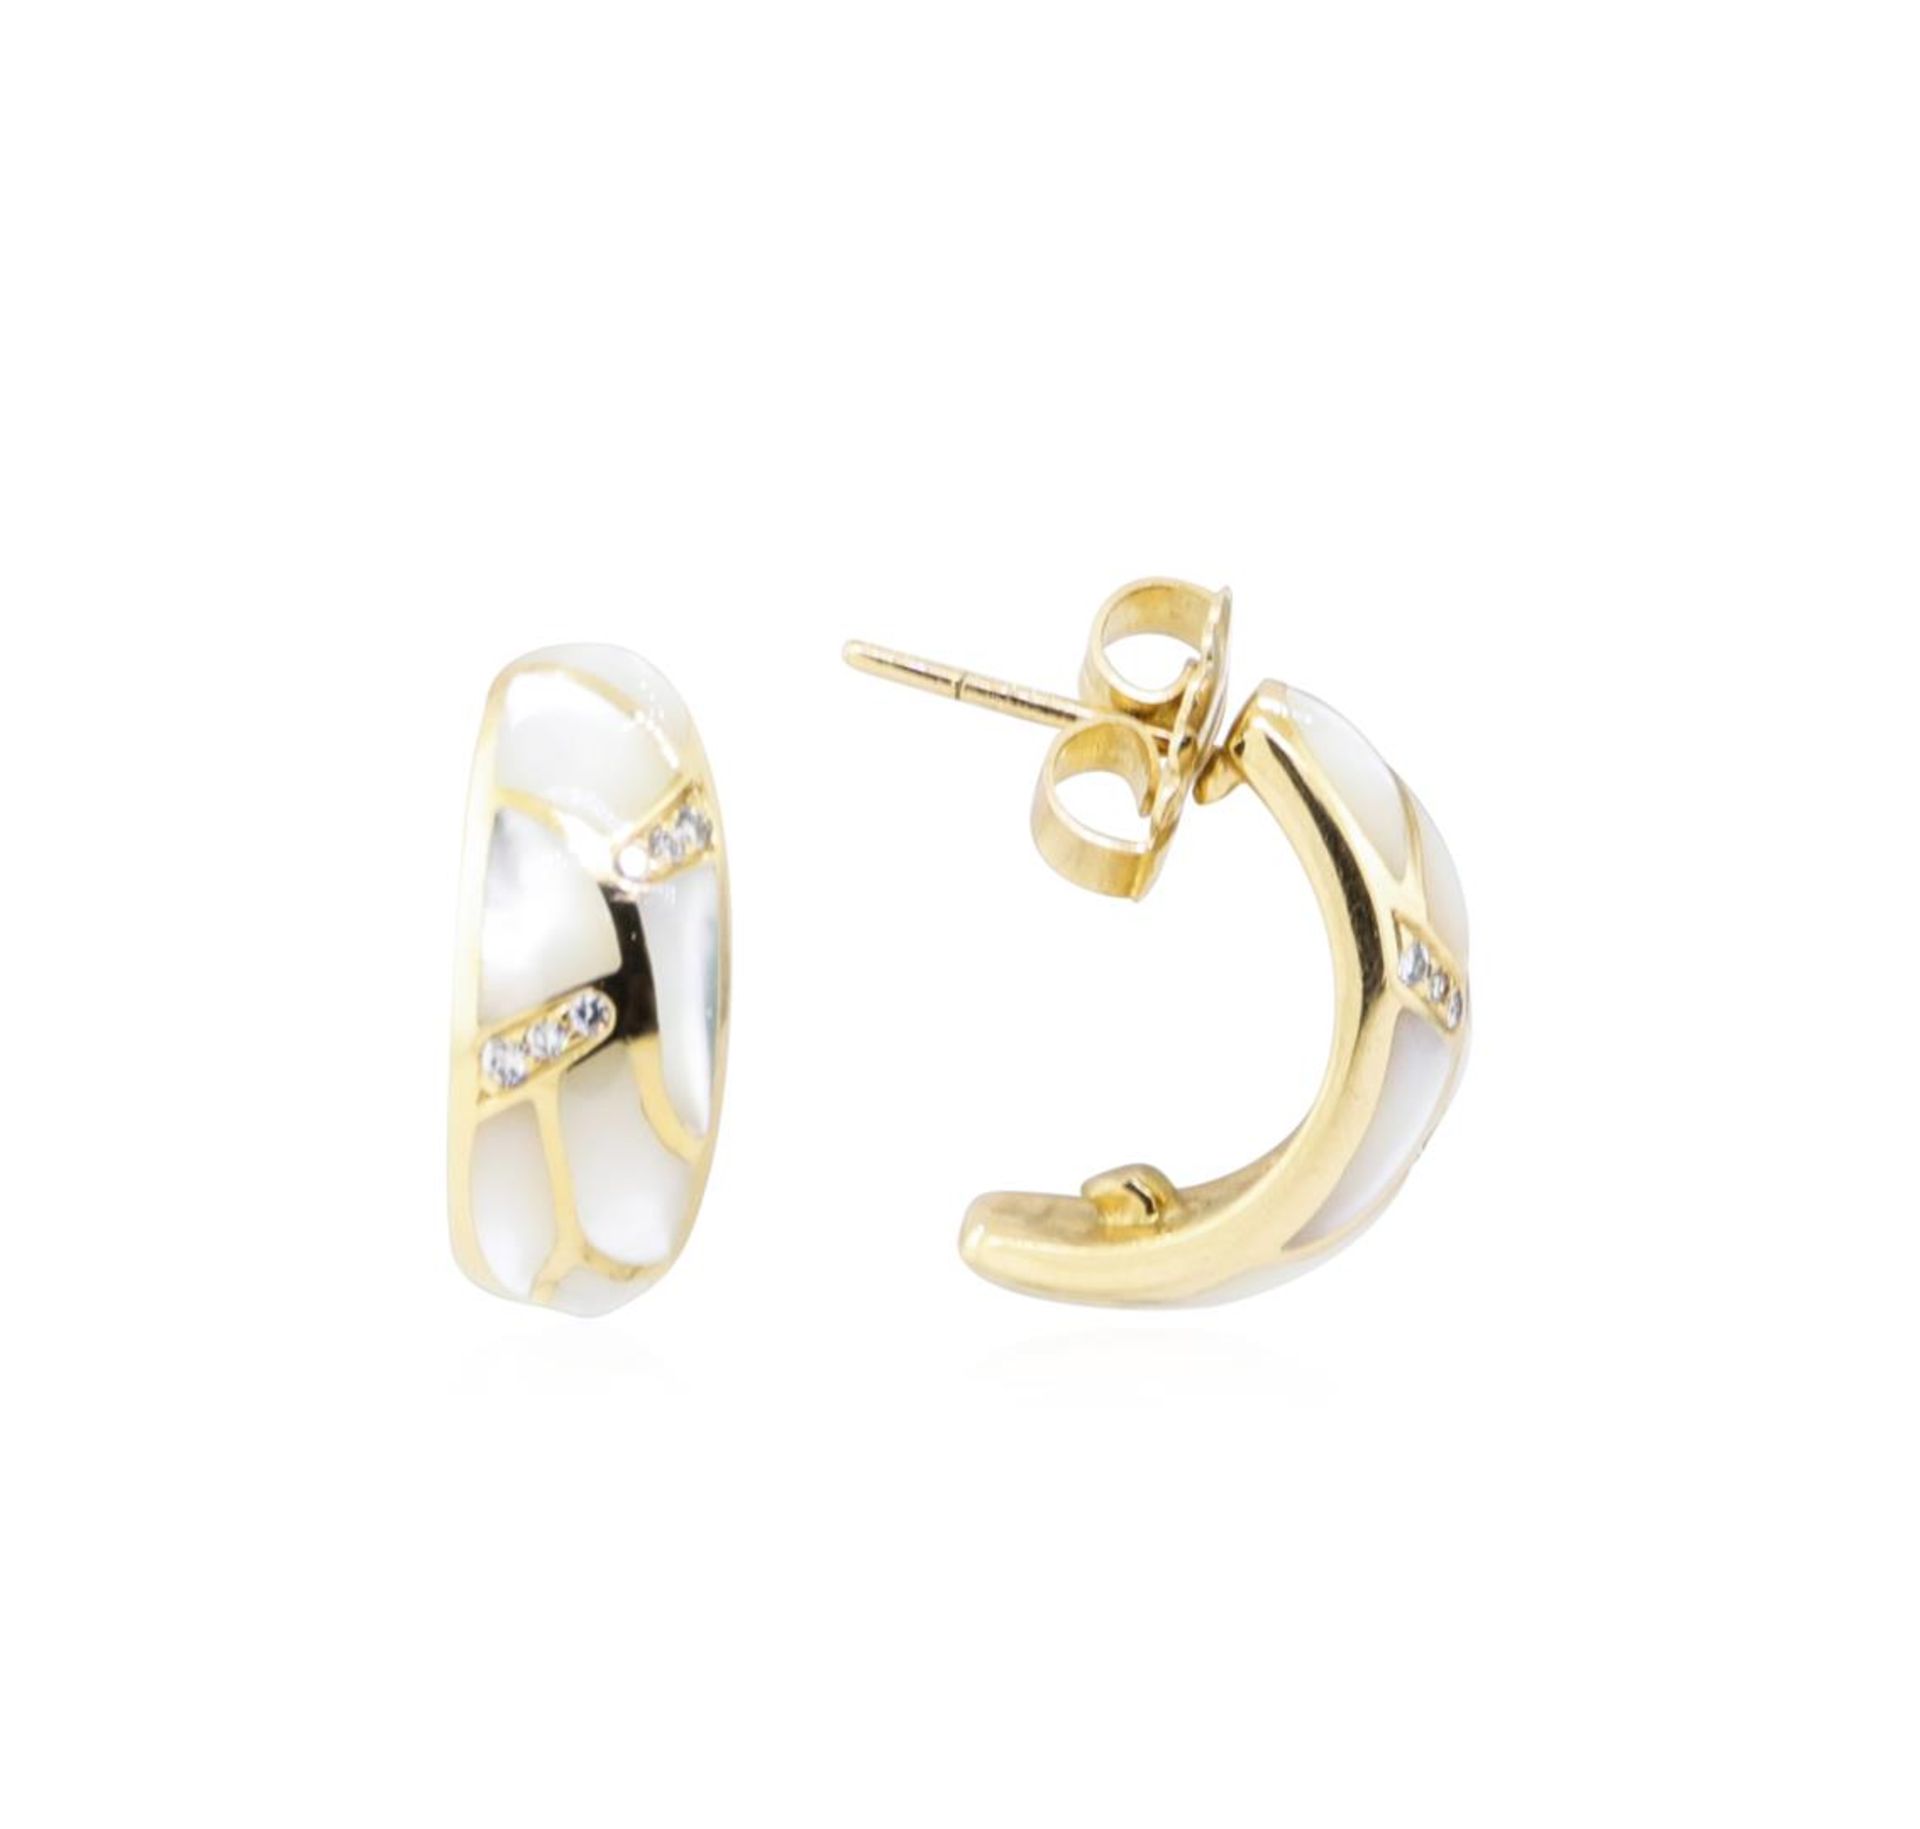 Kabana 0.25ctw Diamond and Inlaid Mother of Pearl Earrings - 14KT Yellow Gold - Image 2 of 2